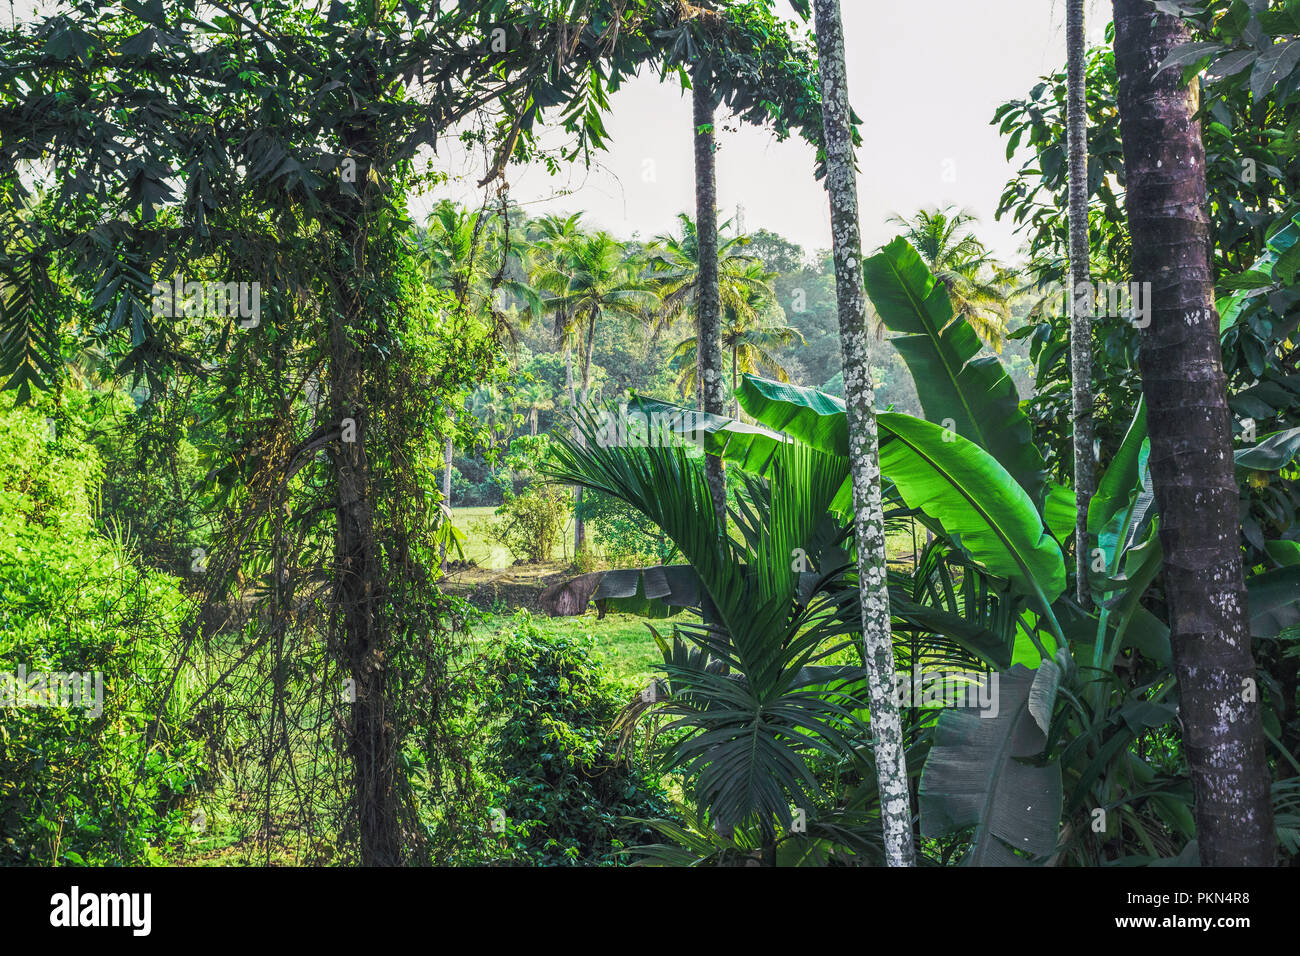 The tropical forest in India, Goa. Palm tropical thickets. Beautiful scenery of a damp tropical jungle. Image of a tropical landscape. Stock Photo